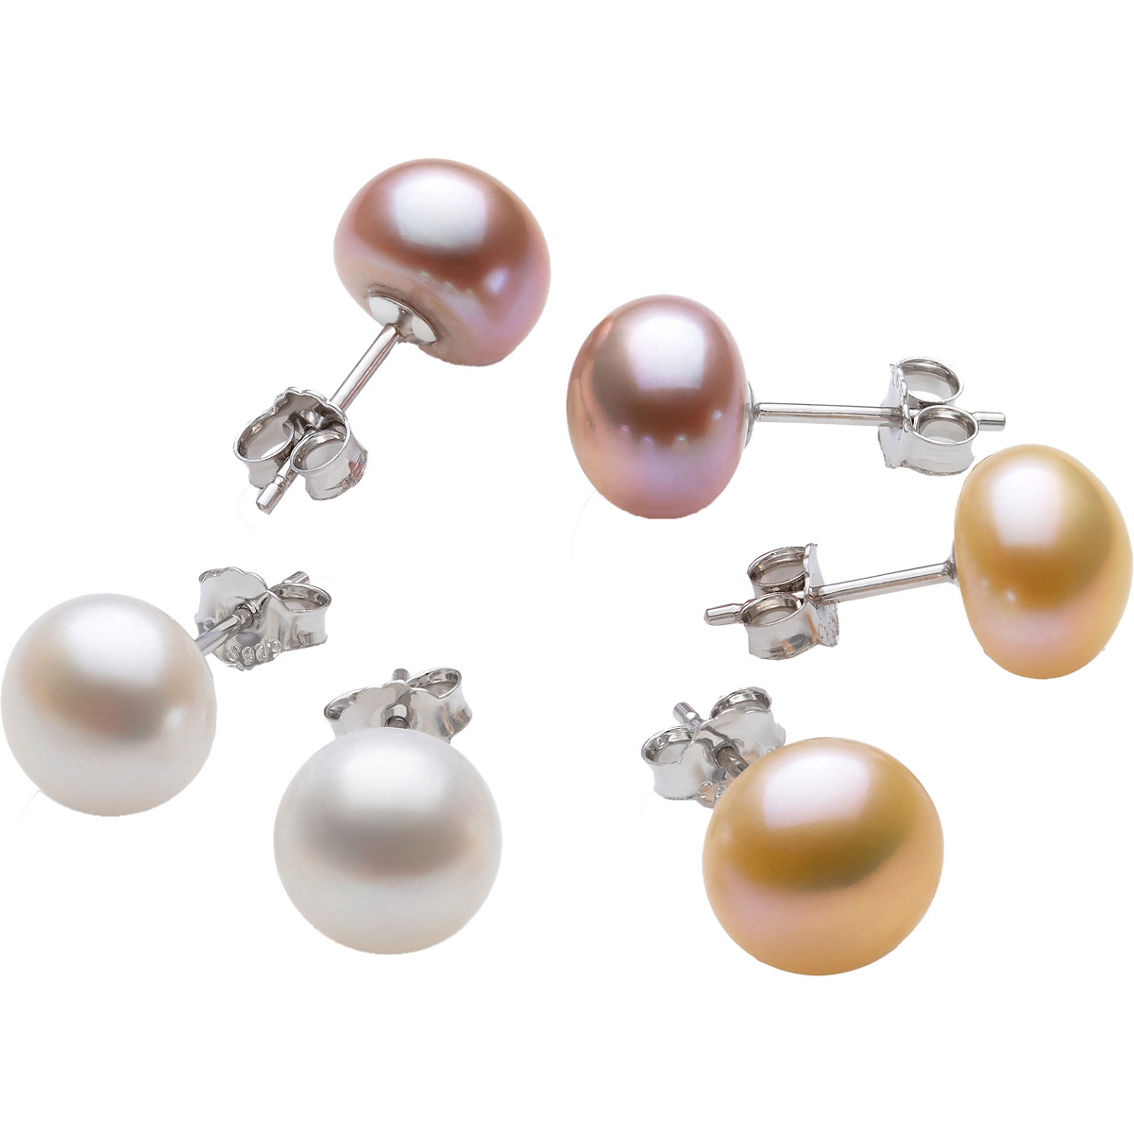 China Pearl Silver 8-9mm Multicolor Freshwater Pearl 3 Pair Stud Earring Set - Image 2 of 2